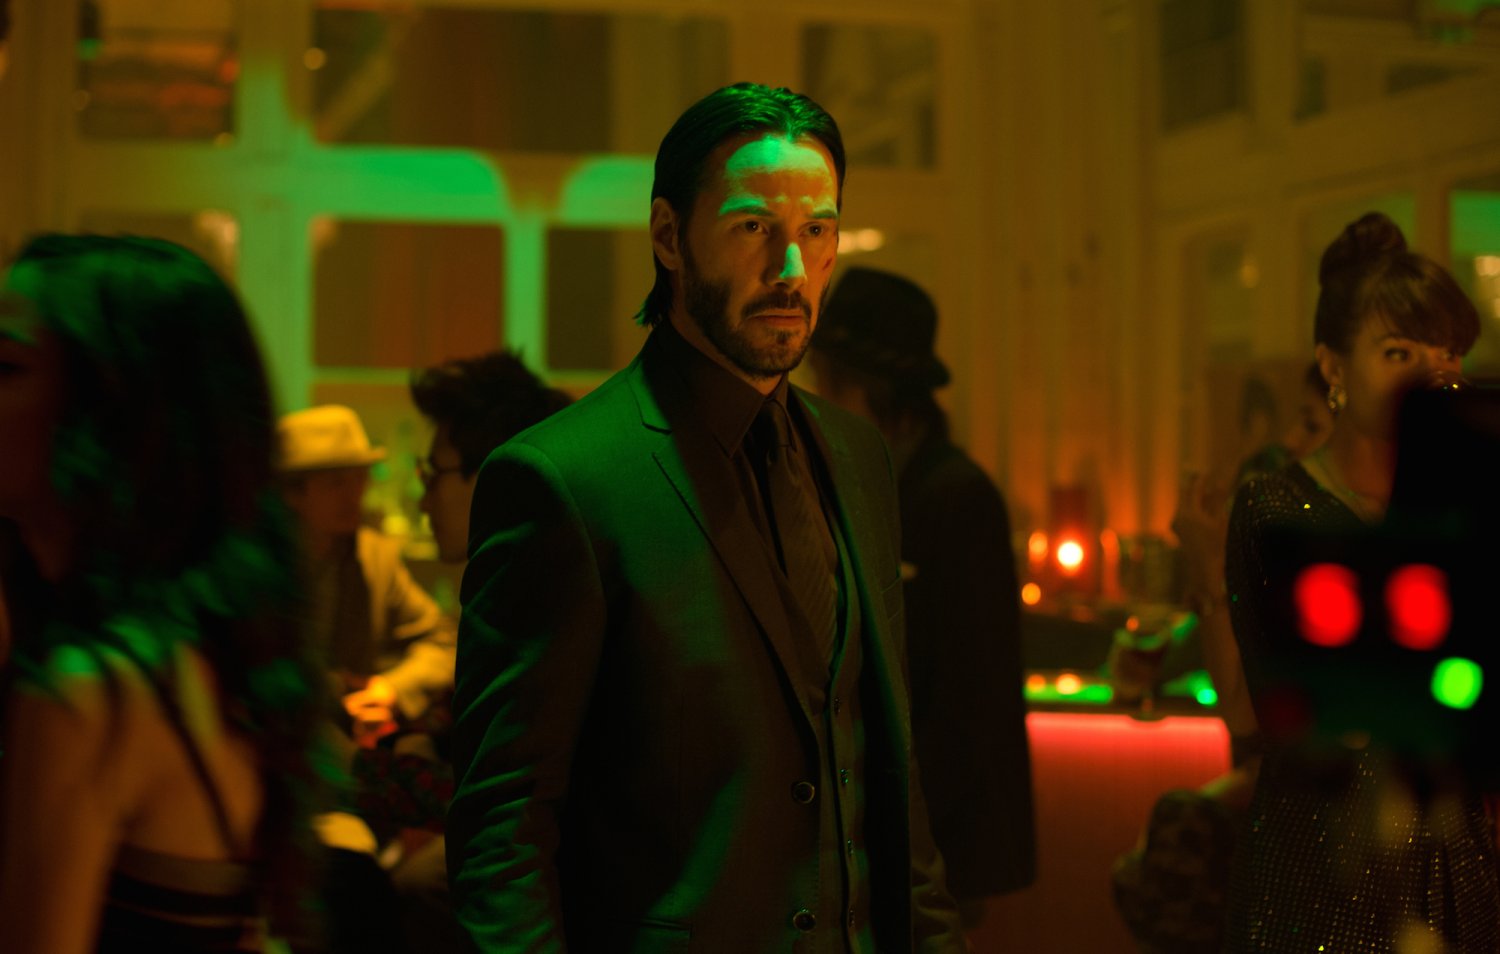 Who is John Wick? | Page 2 of 2| Confusions and Connections1500 x 954